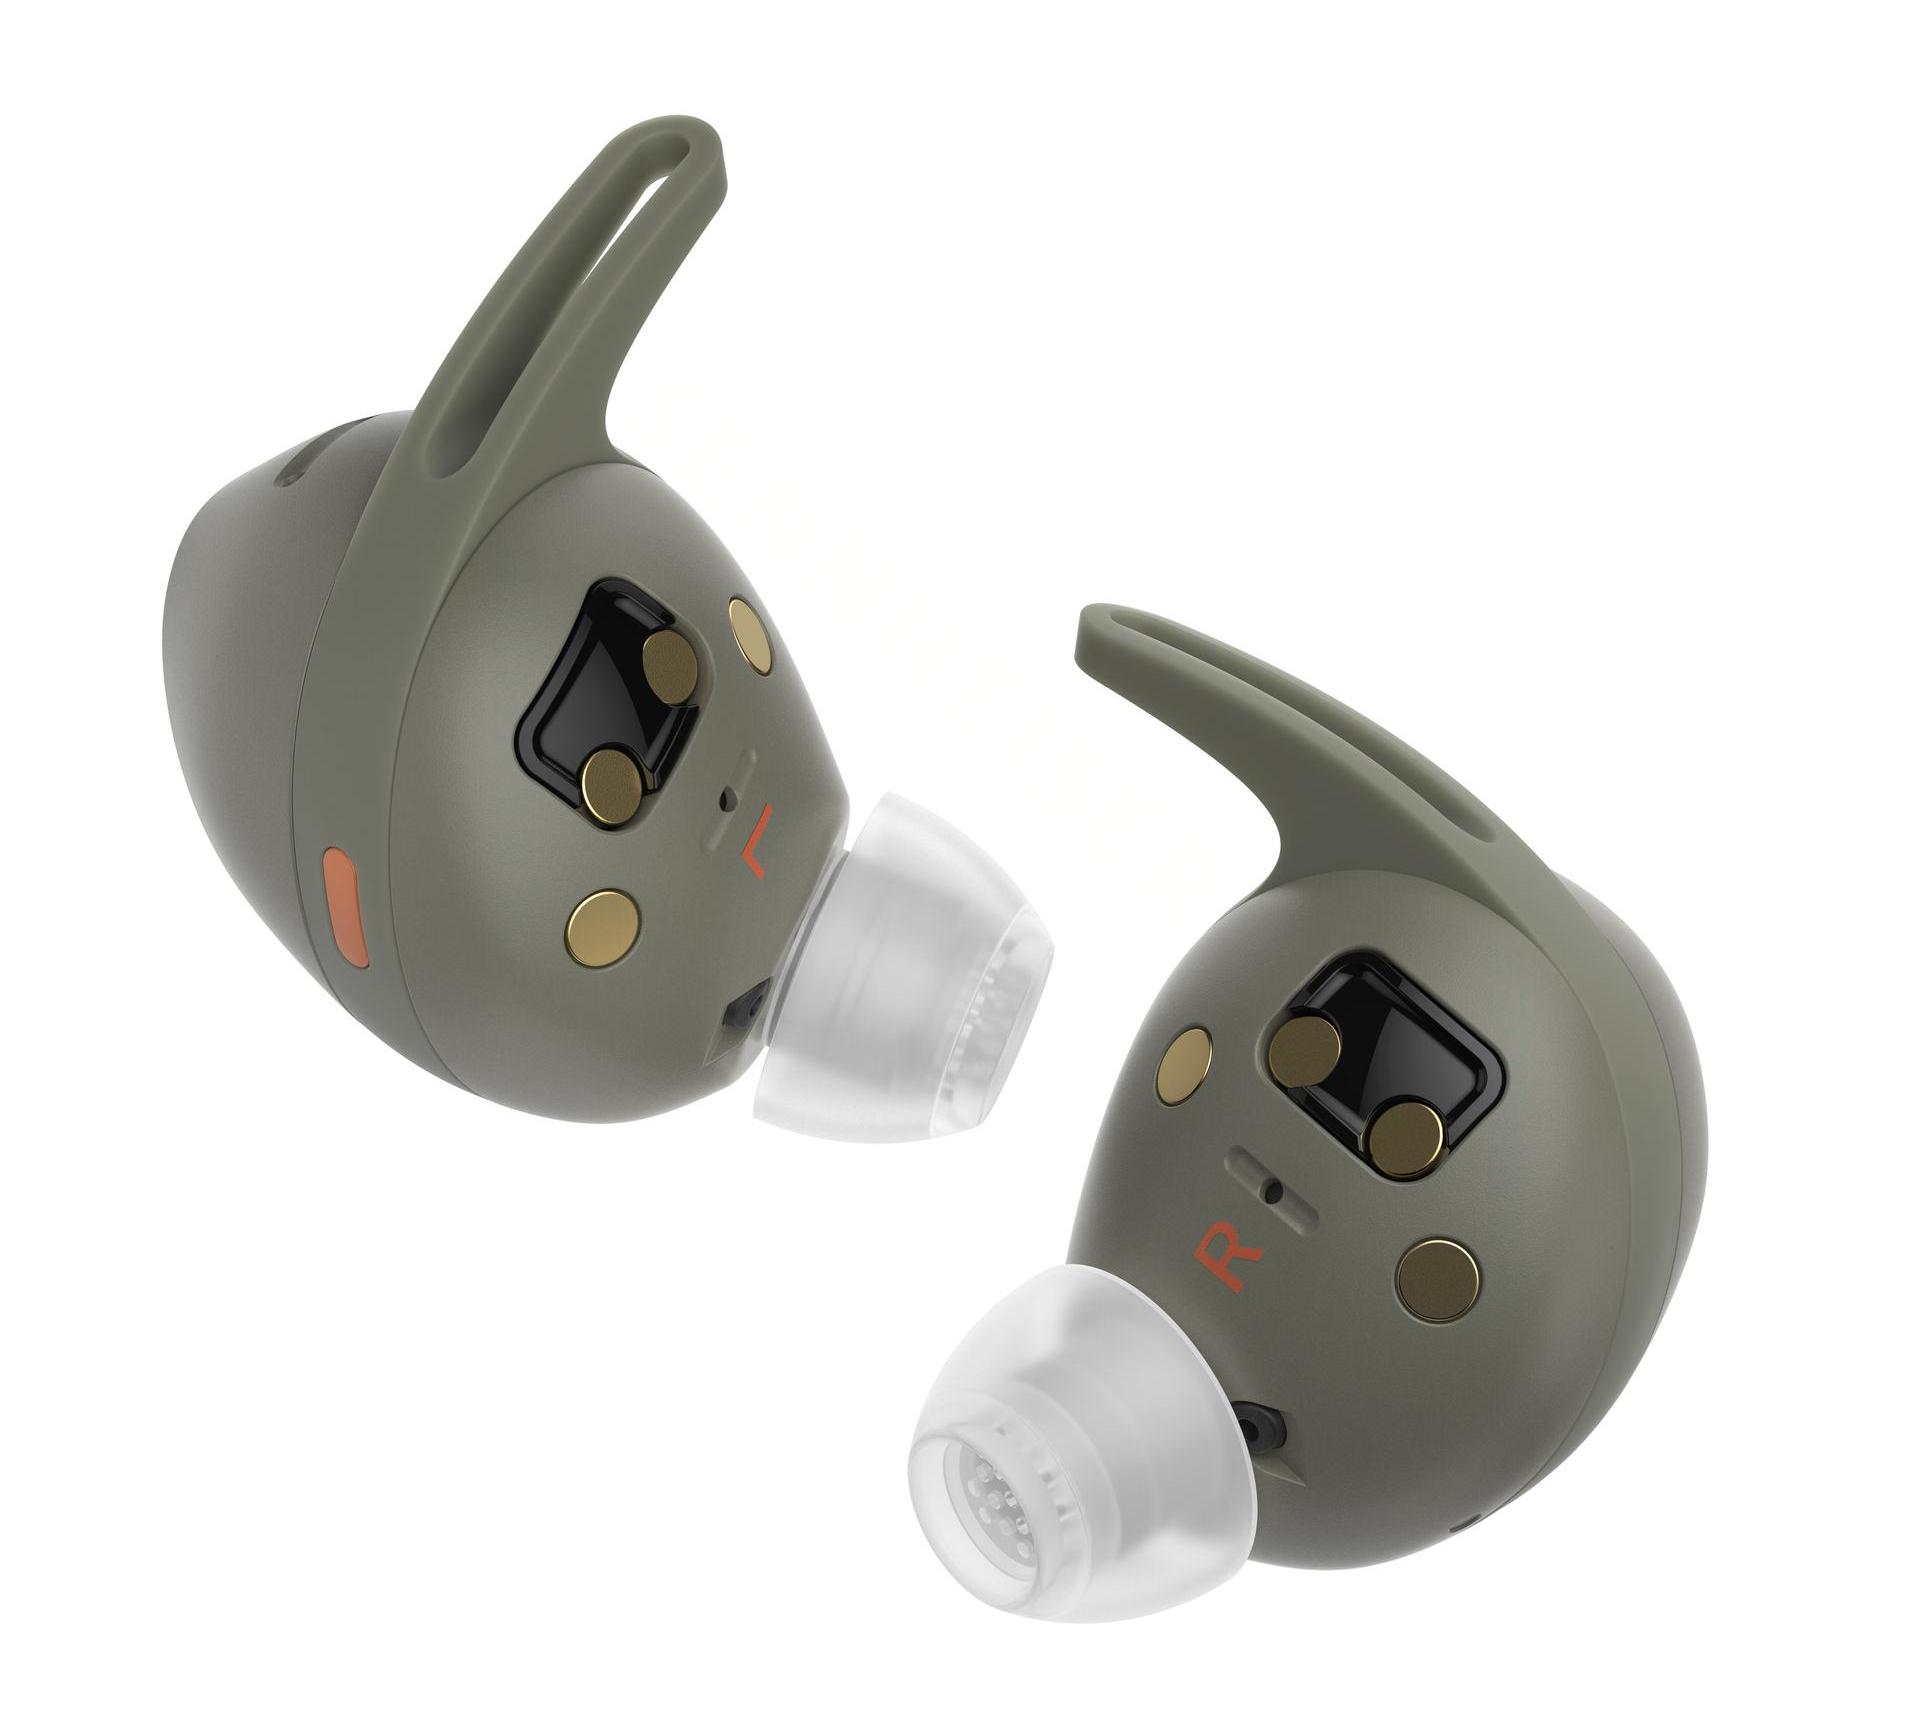 MOMENTUM Sport's integrated heartrate and core temperature sensors are placed strategically in the ear canal, known for its stability during physical movement.